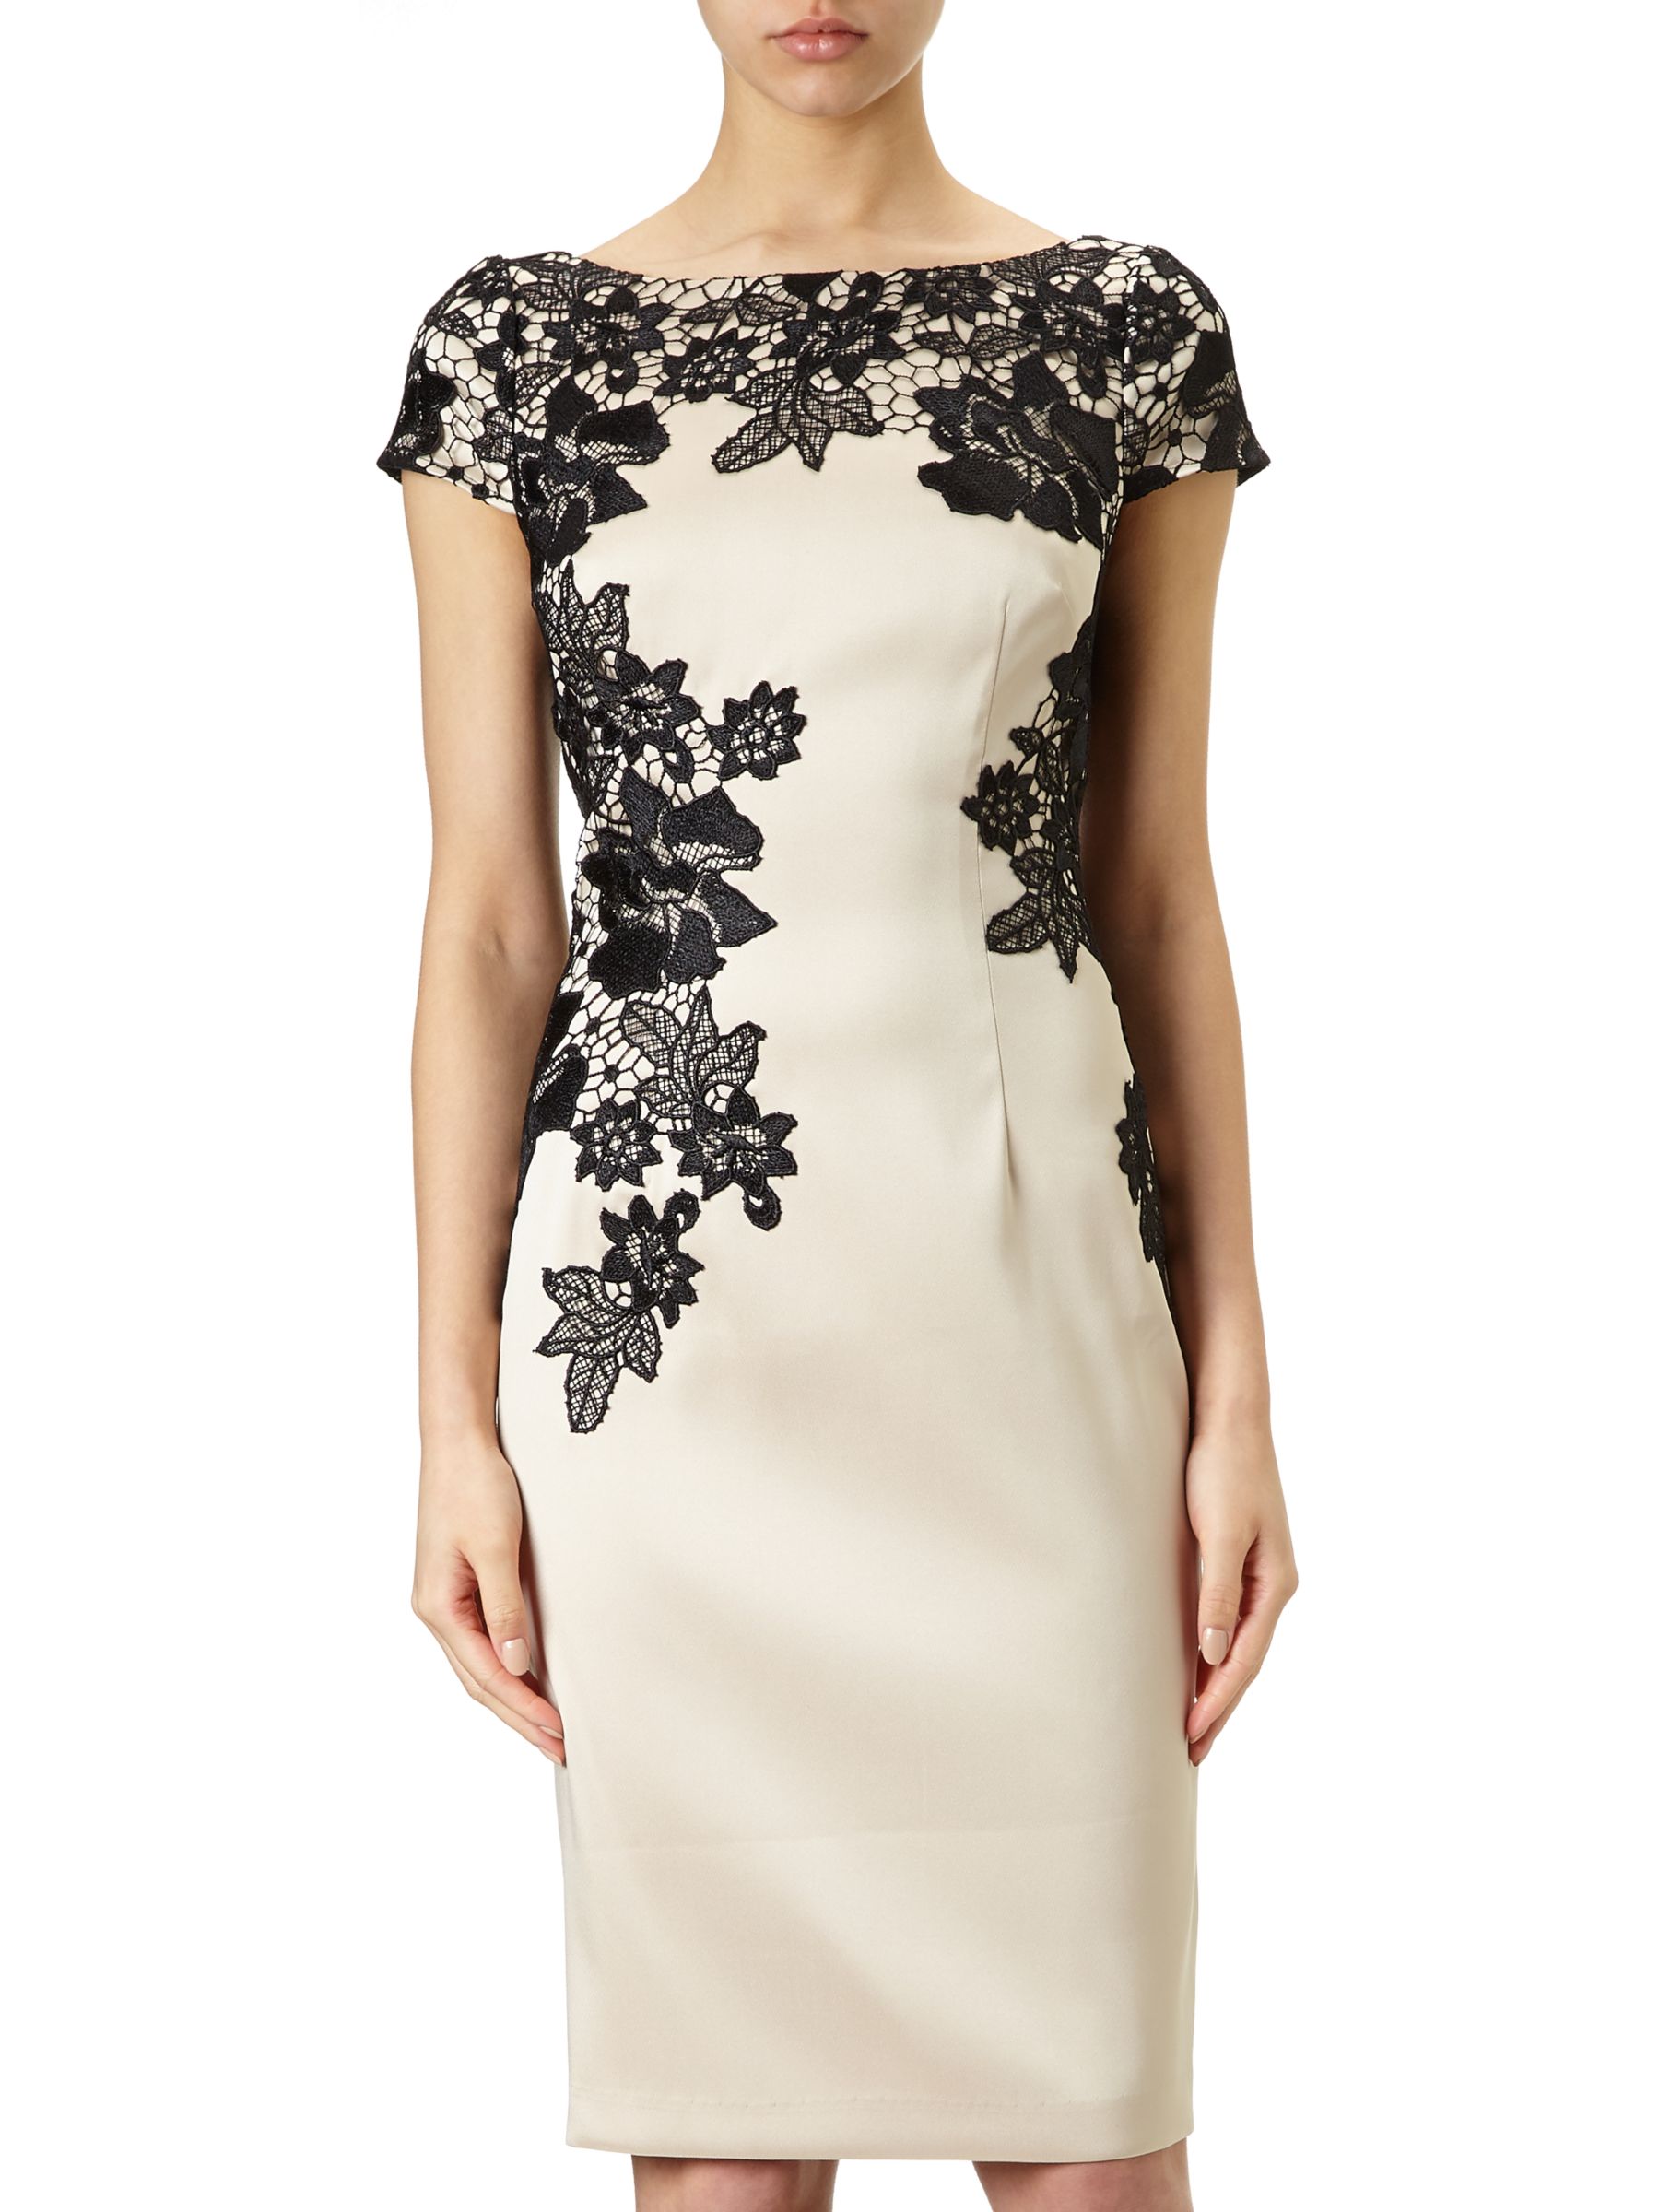 Adrianna Papell Cap Sleeve Cocktail Dress, Champagne/Black